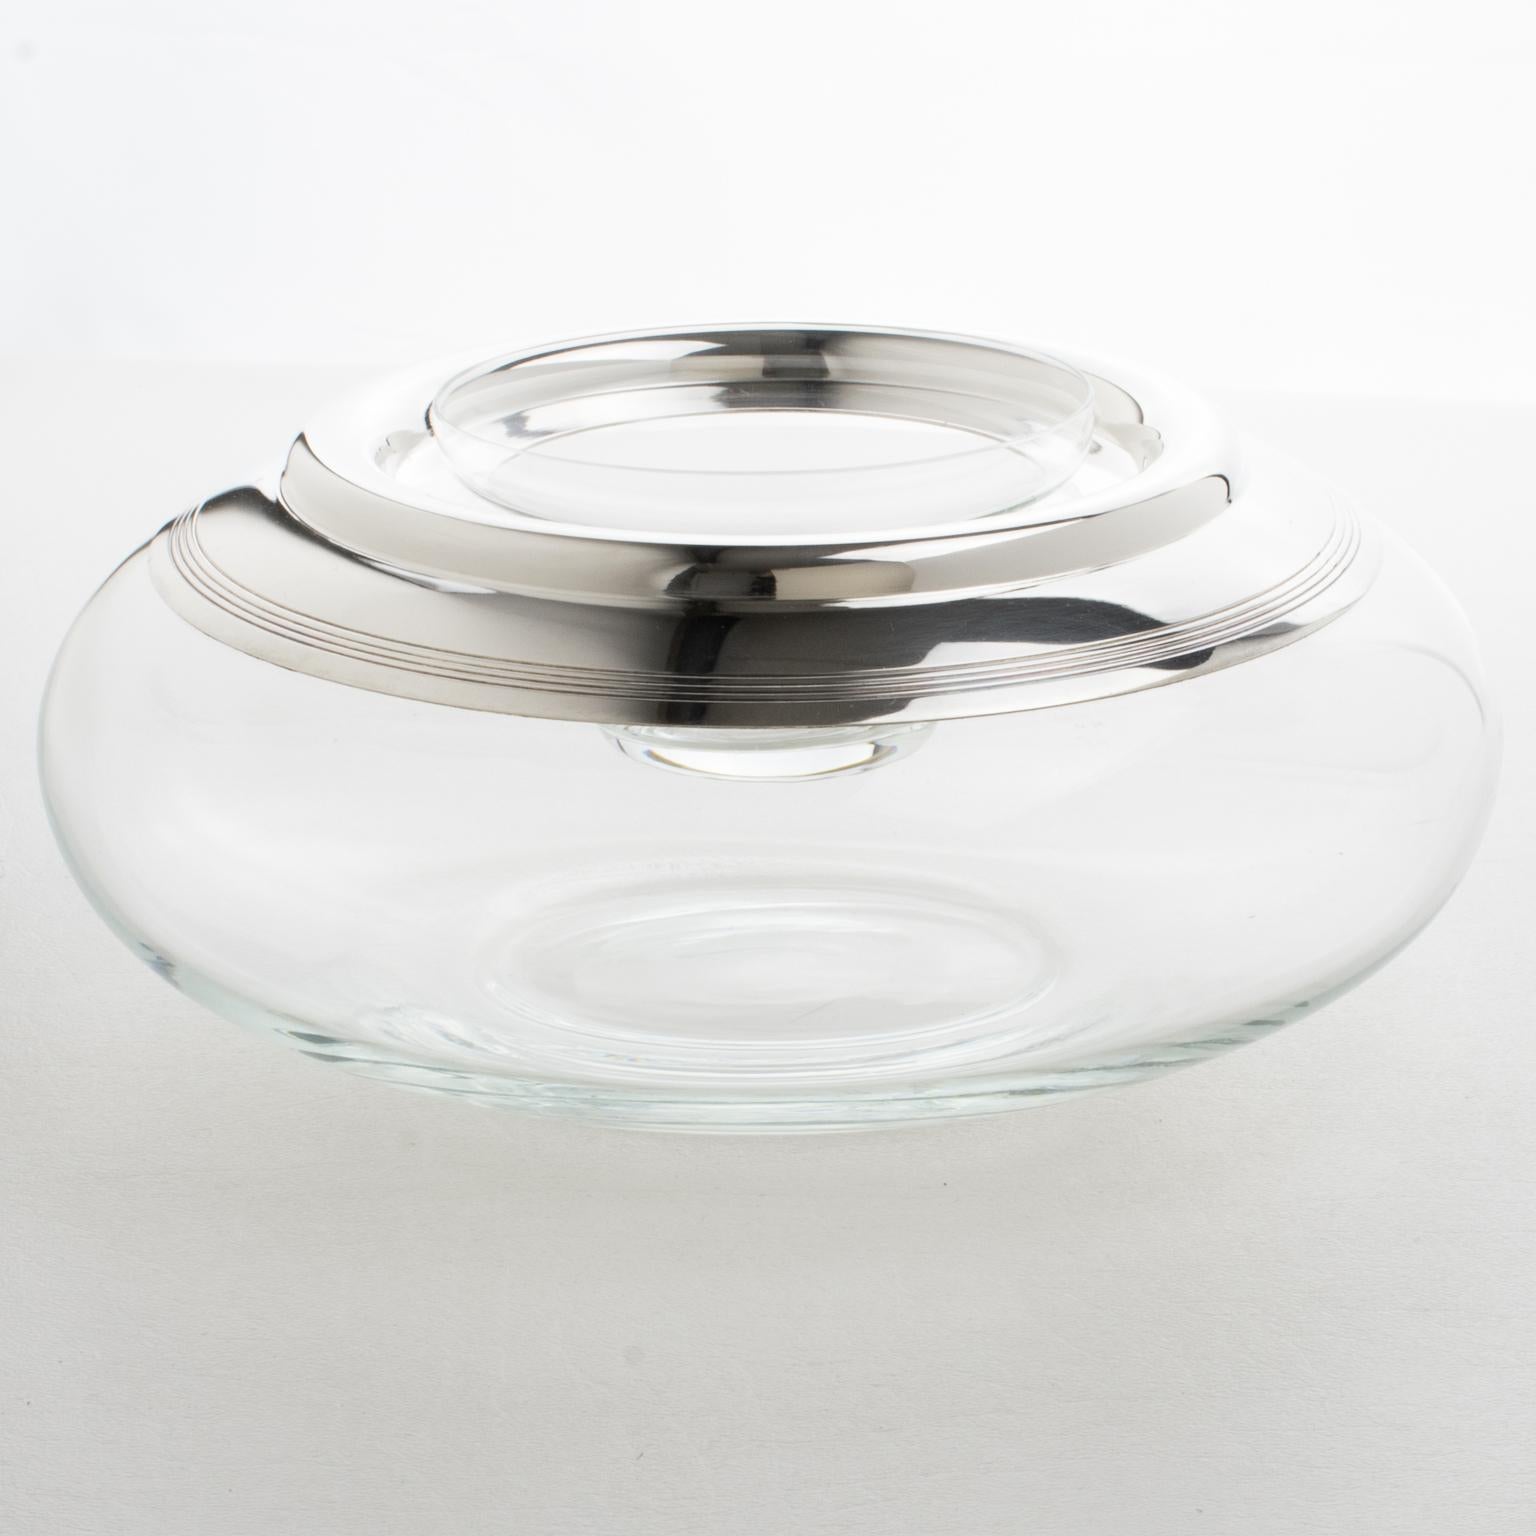 Stylish Mid-Century silver plate and crystal caviar serving bowl, dish, or chiller designed by French silversmith St Hilaire in the 1960s. Chic design with geometric streamline shape, featuring a large puffy crystal container with silverplate metal